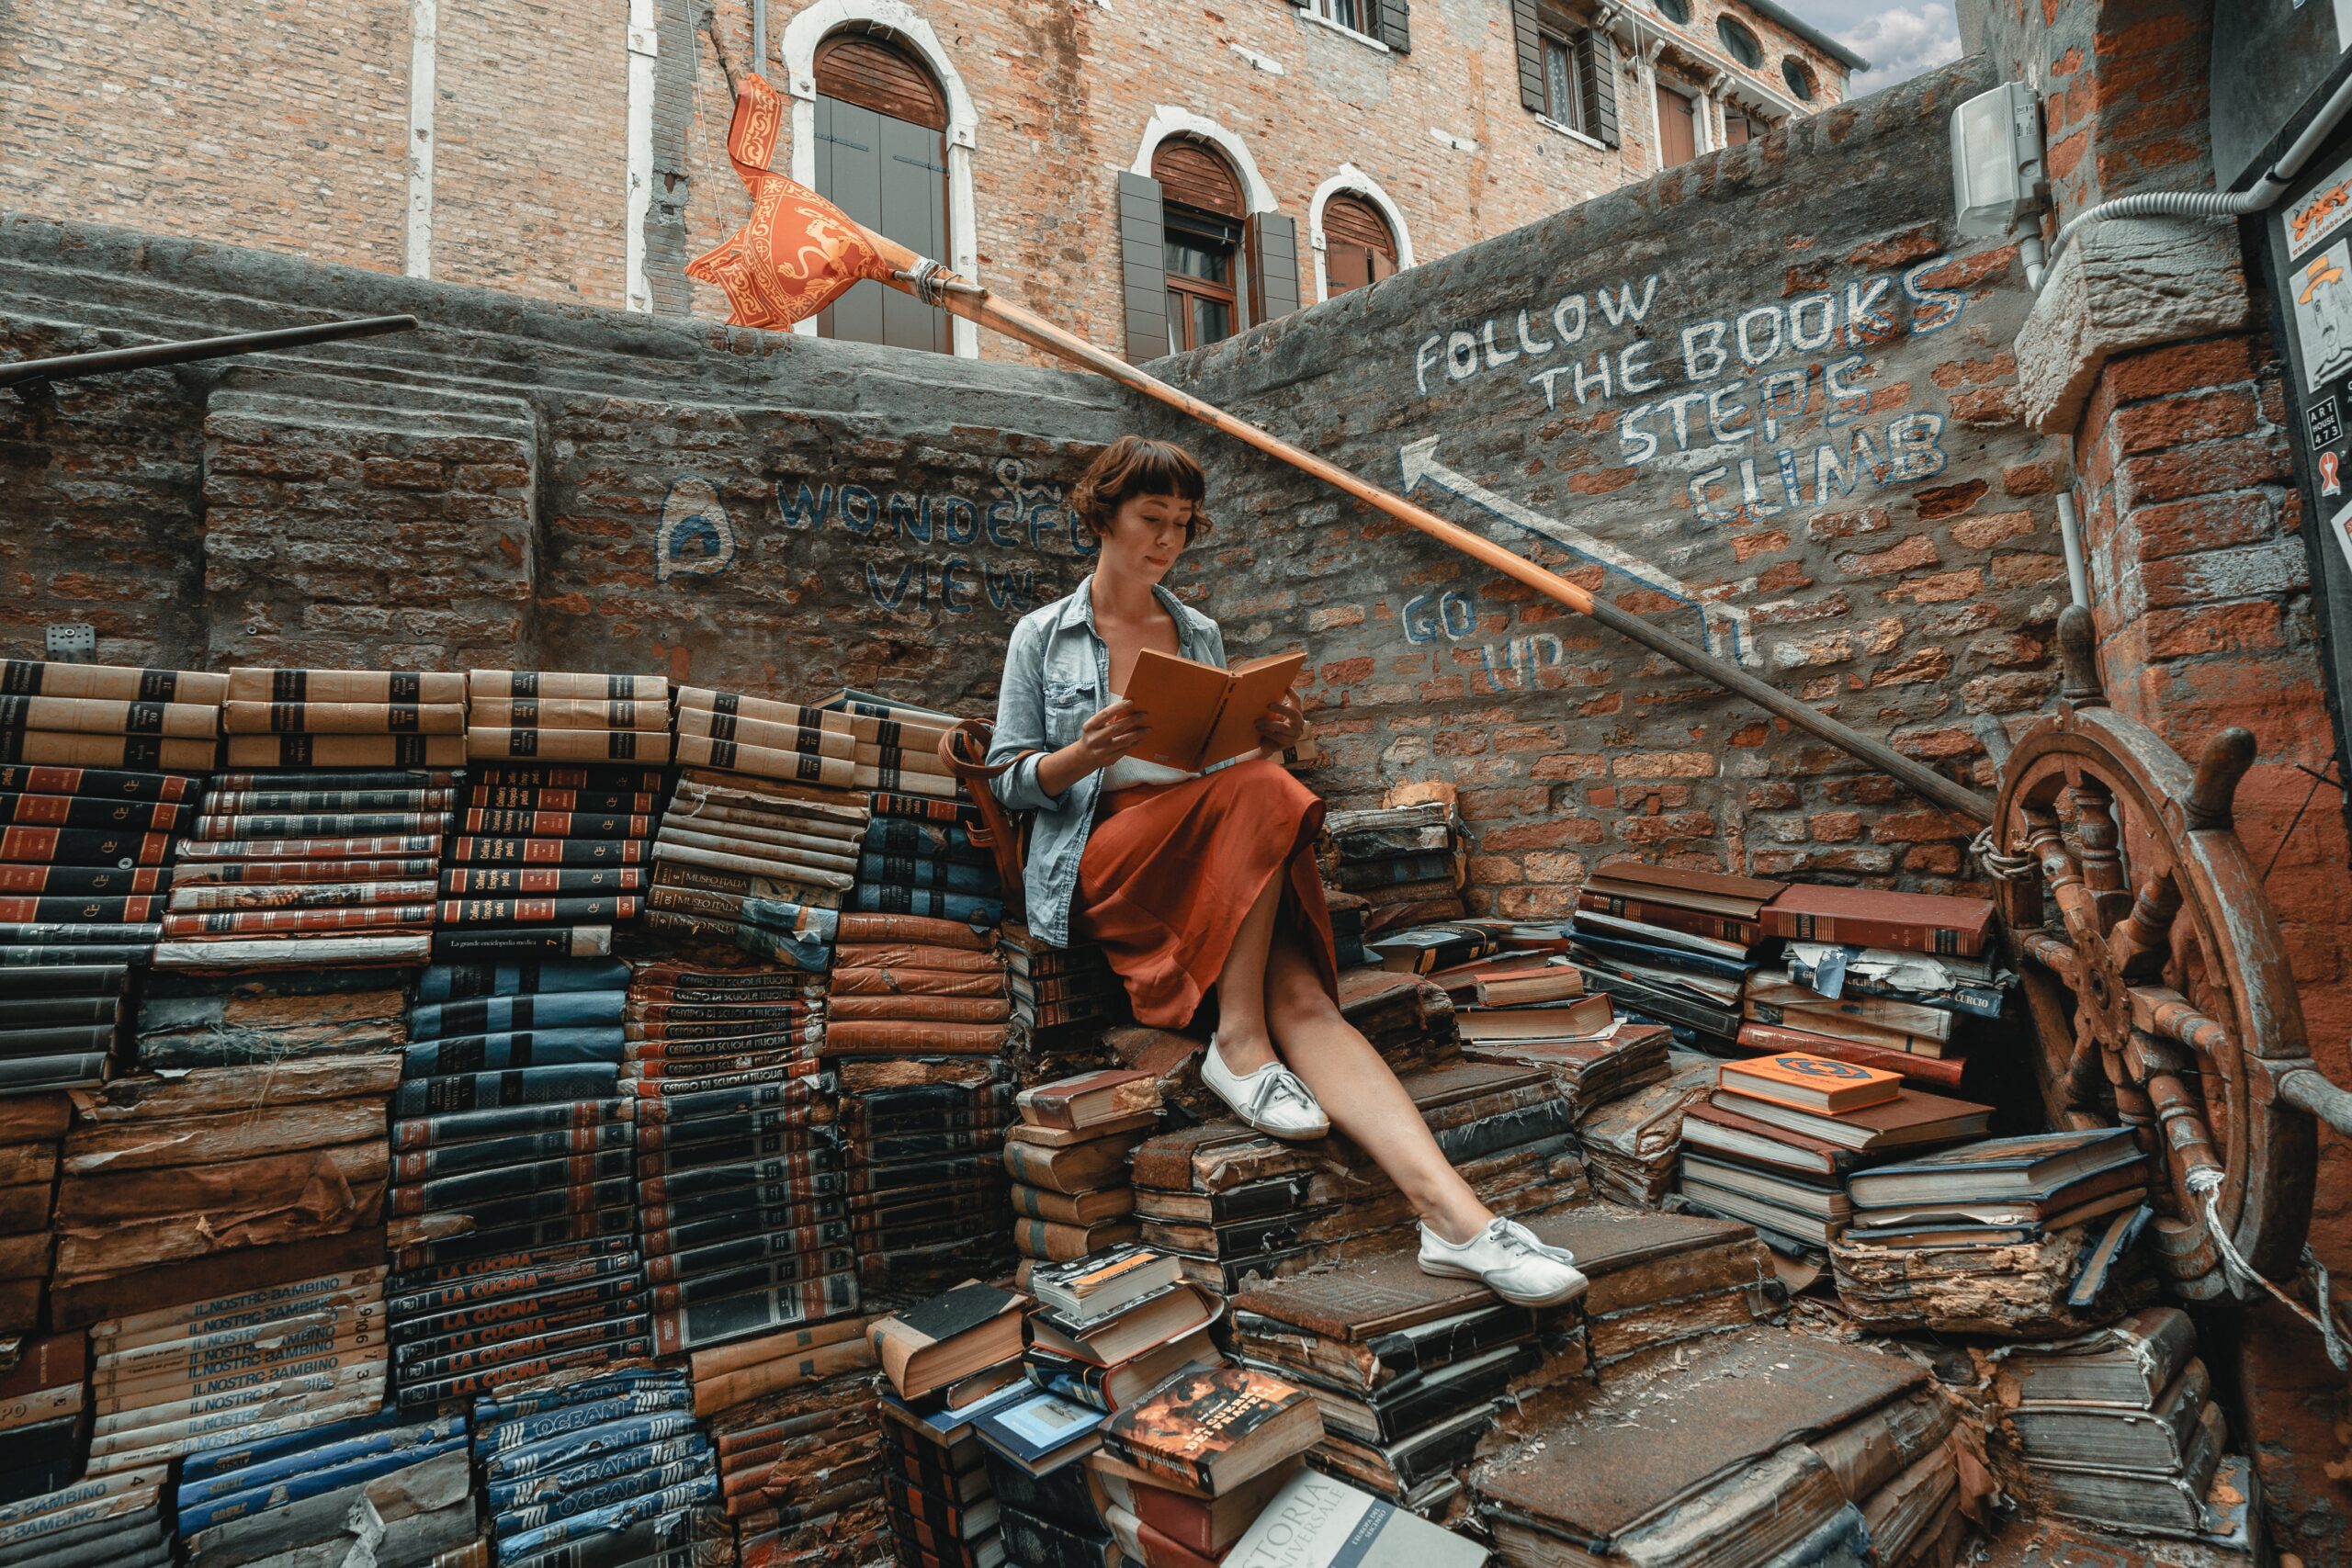 A woman sits reading a book on a staircase made from old books.